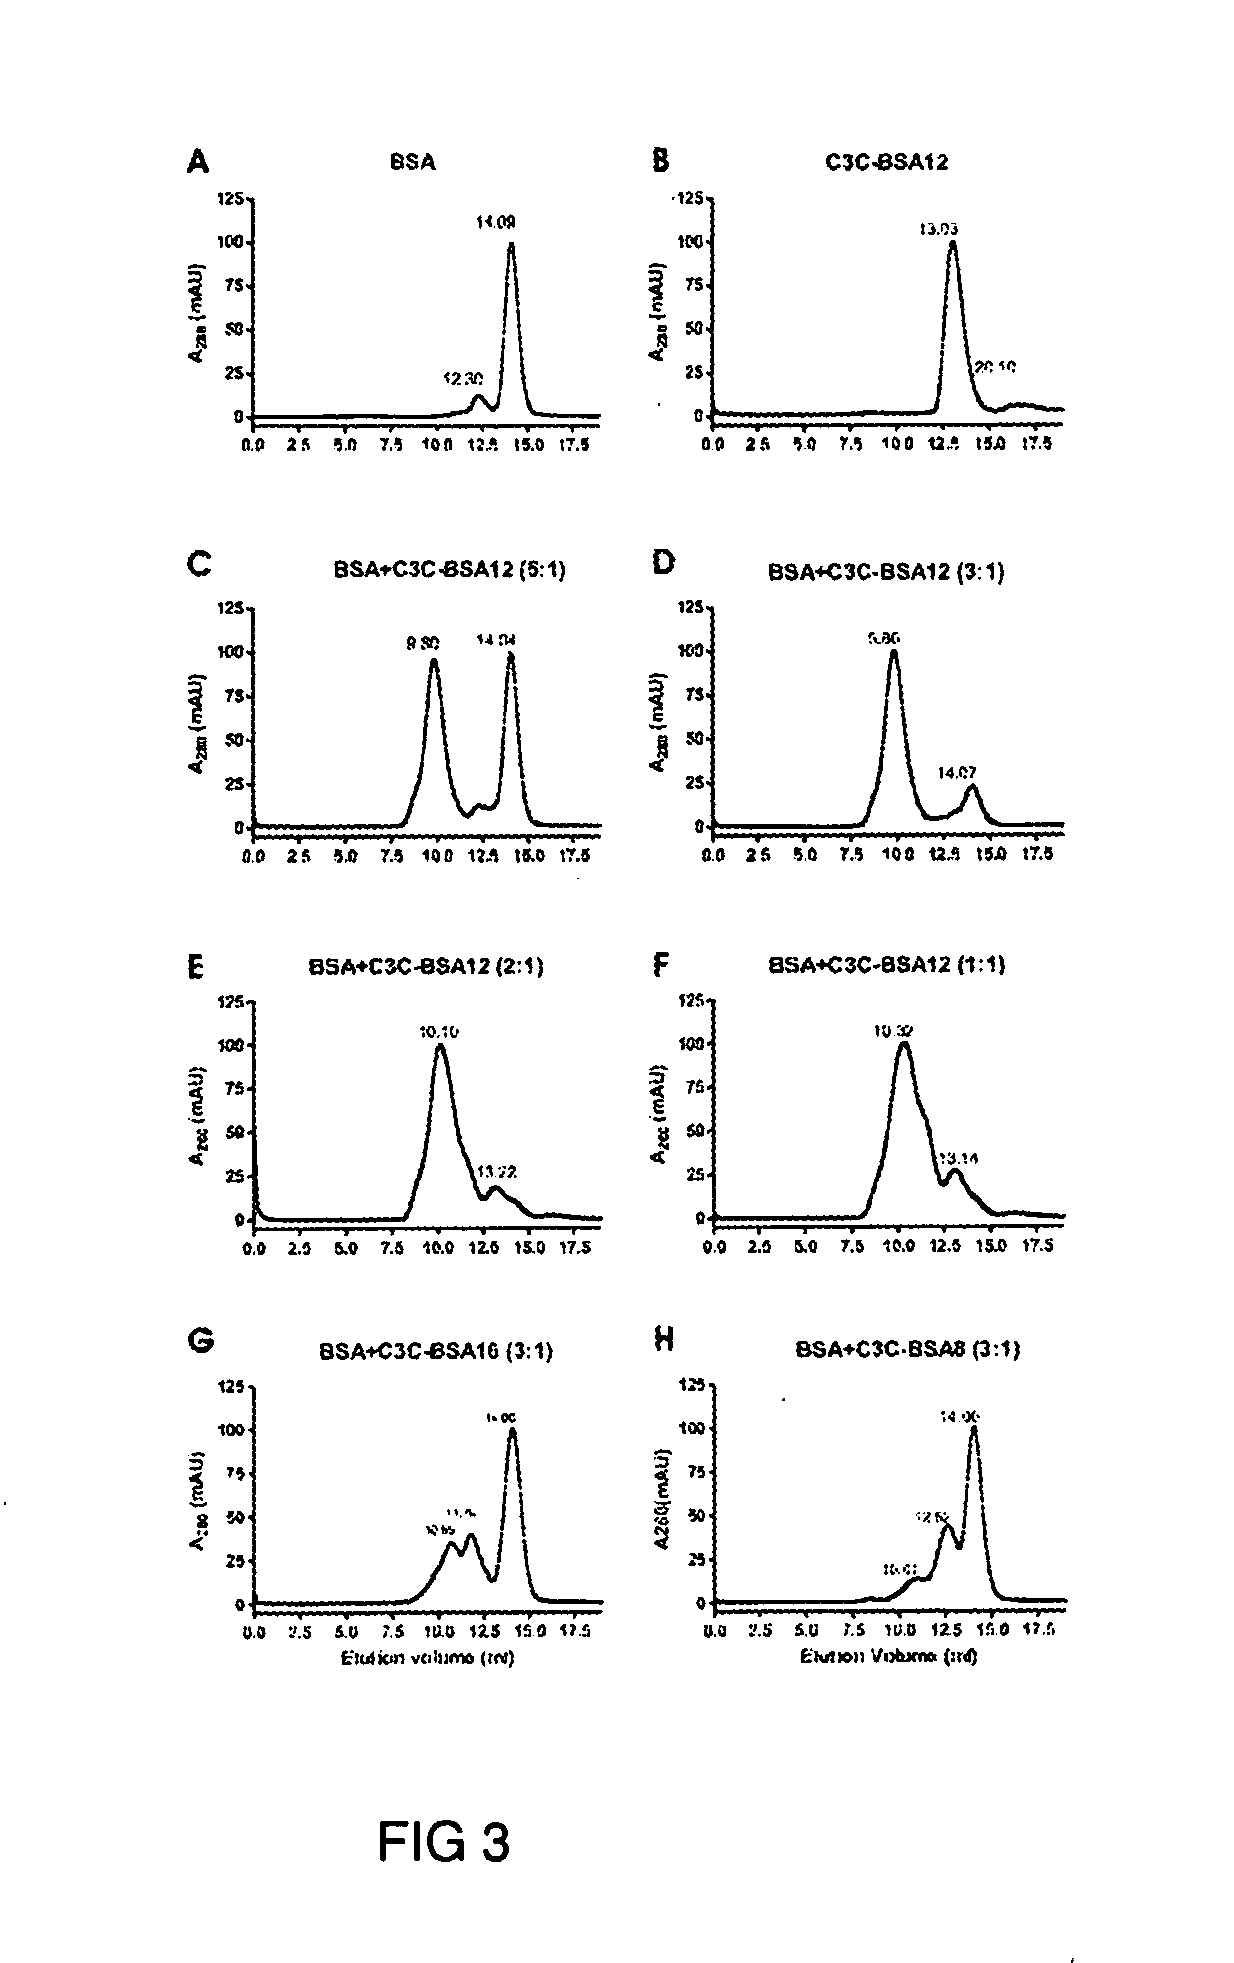 Induction of mucosal immune responses by mucosal delivery pentabody complex (MDPC)